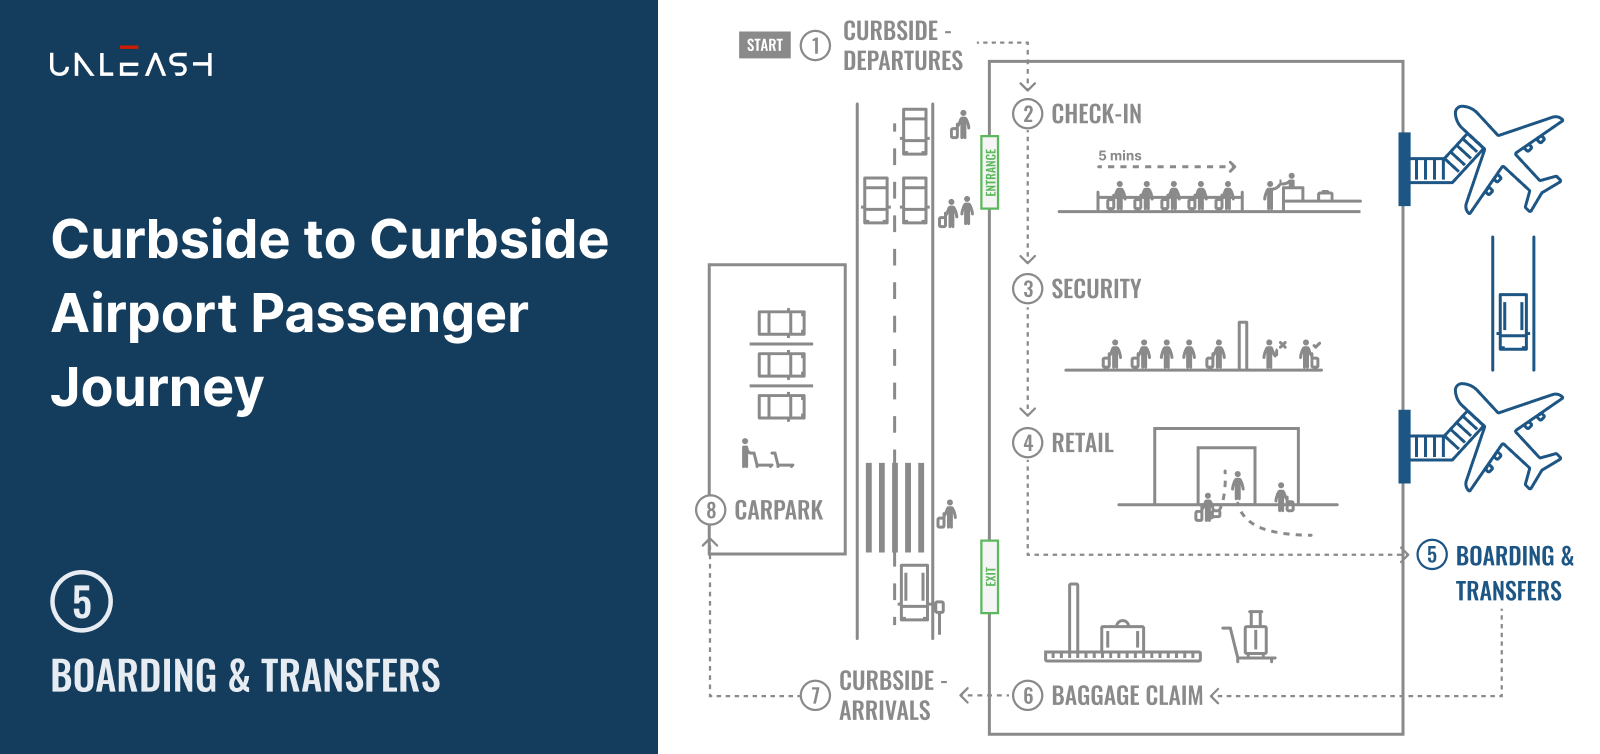 Featured image: Curbside to Curbside Airport Passenger Journey - Part 5 Boarding and Transfers - Read full post: Computer Vision for Airport Operations Series - Part 5, 'Boarding & Transfers'